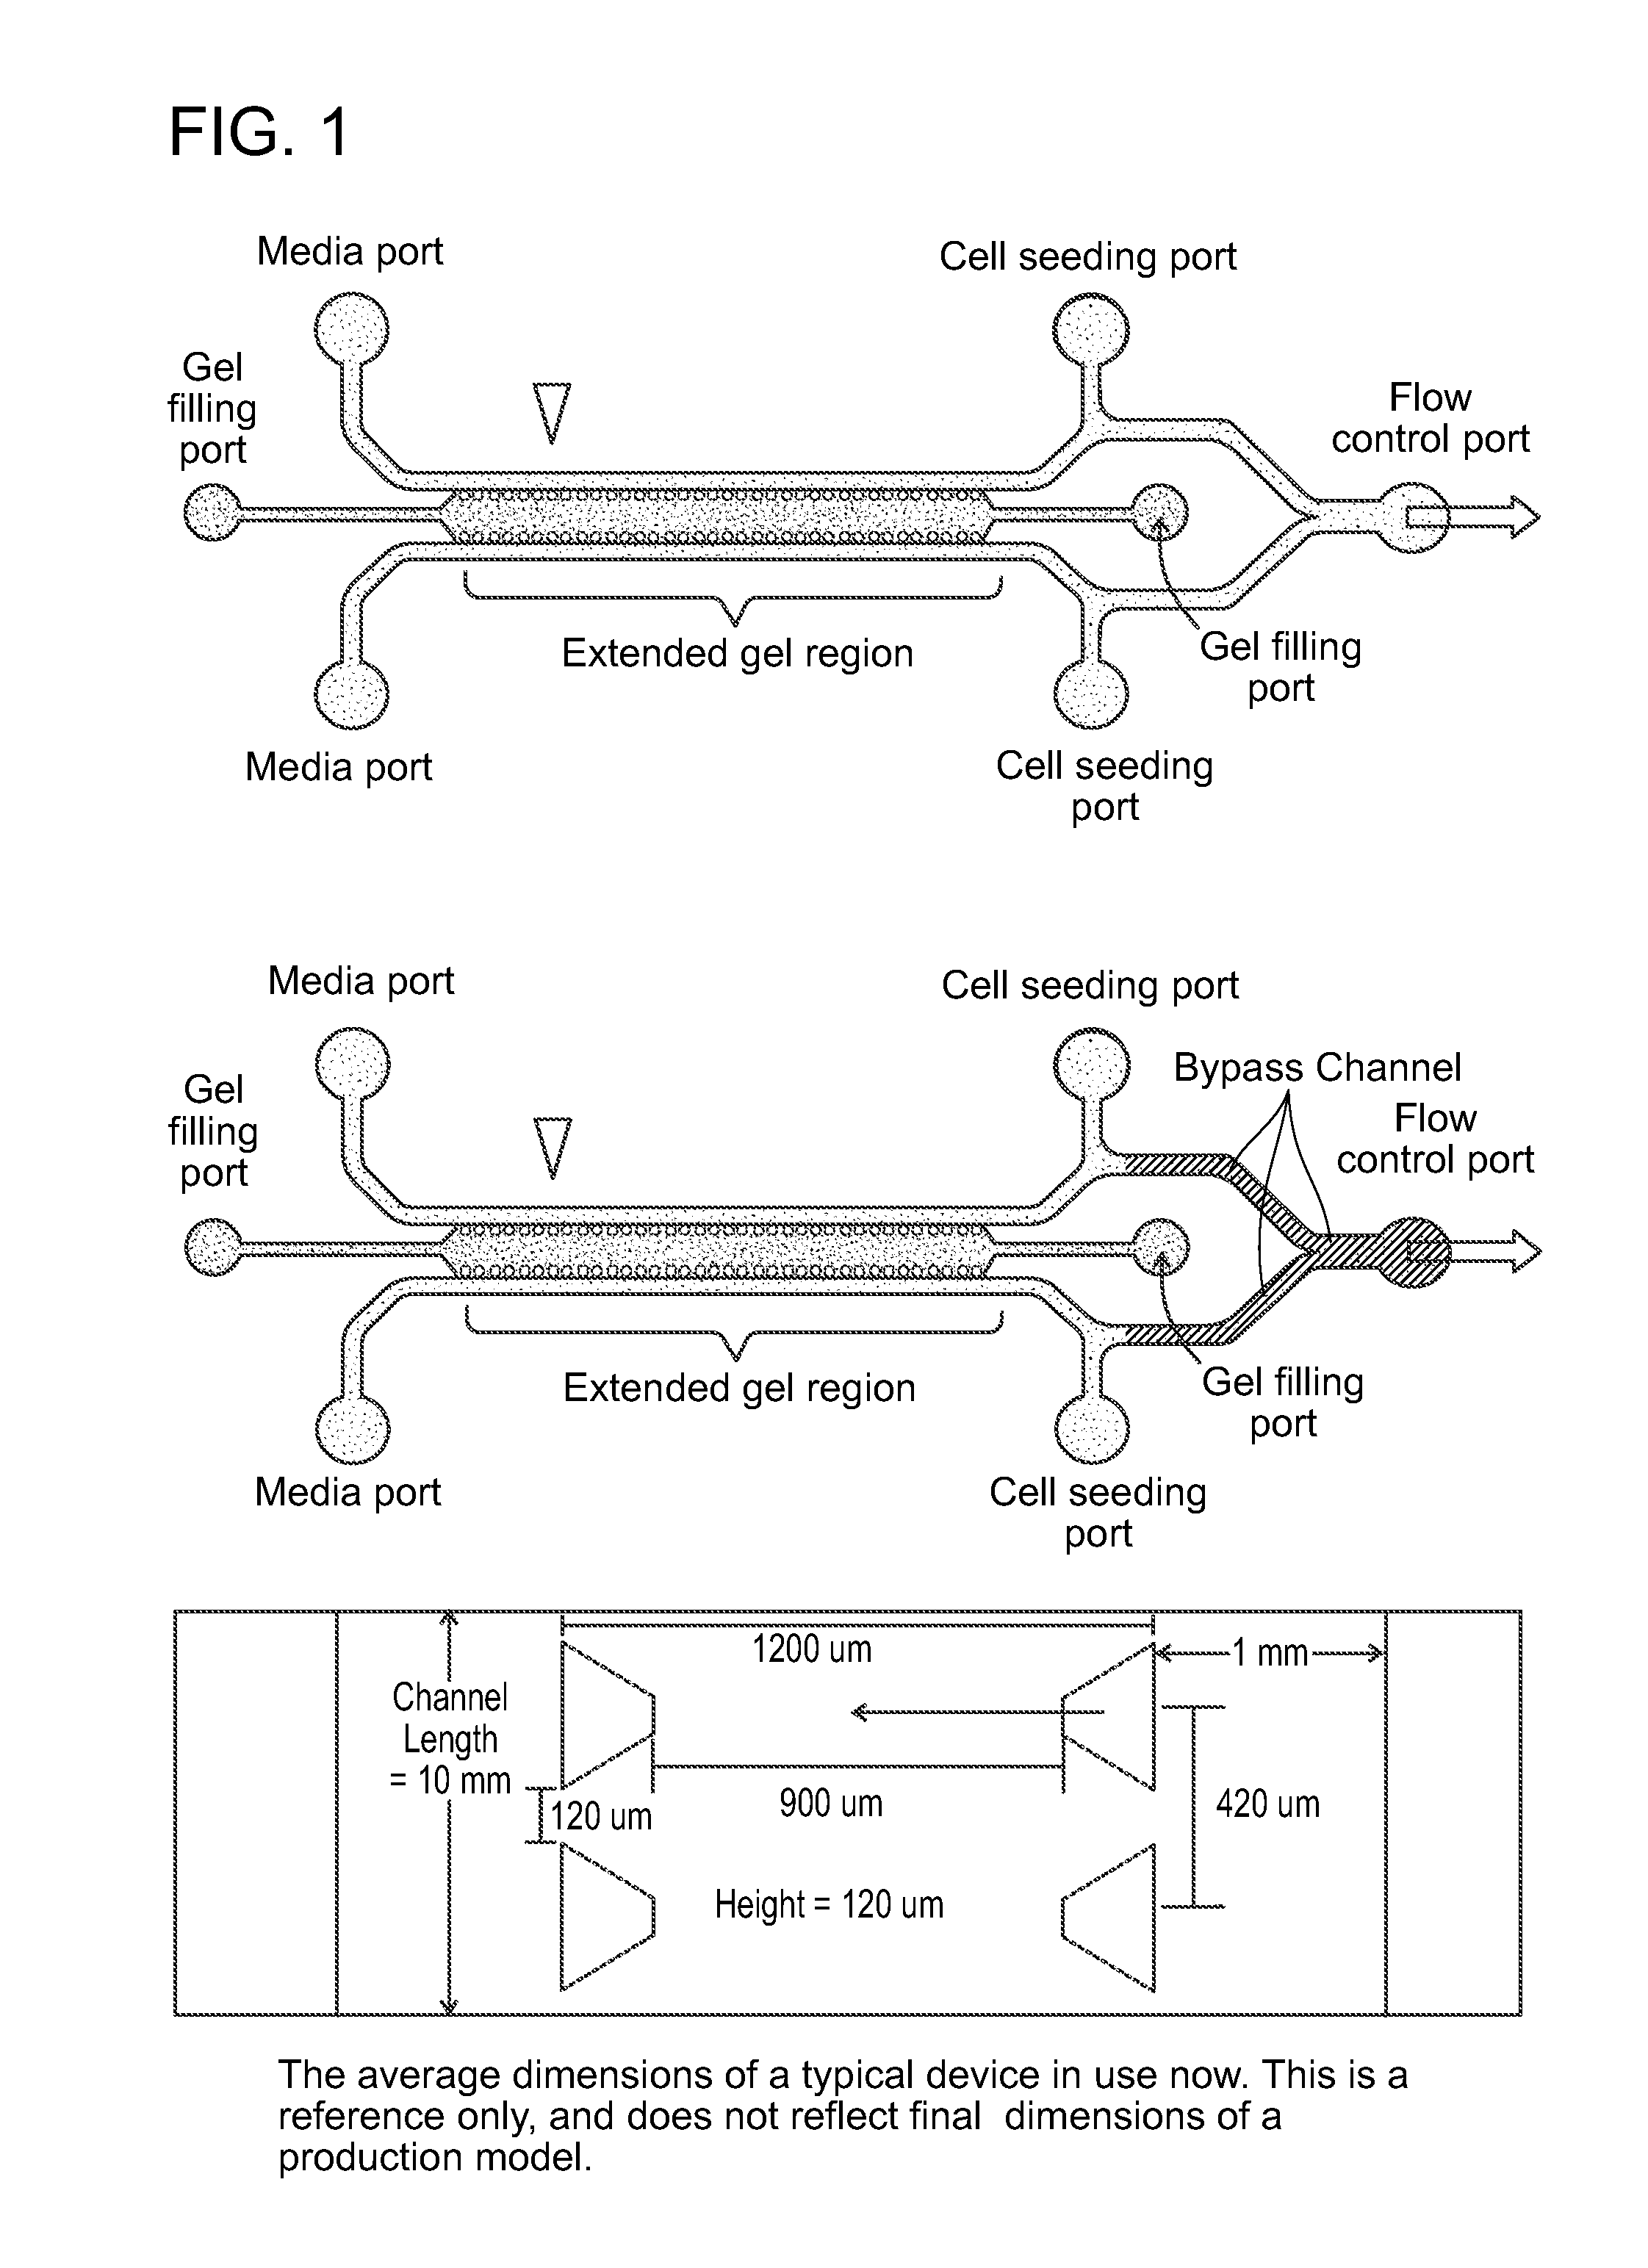 Device For High Throughput Investigations Of Multi-Cellular Interactions